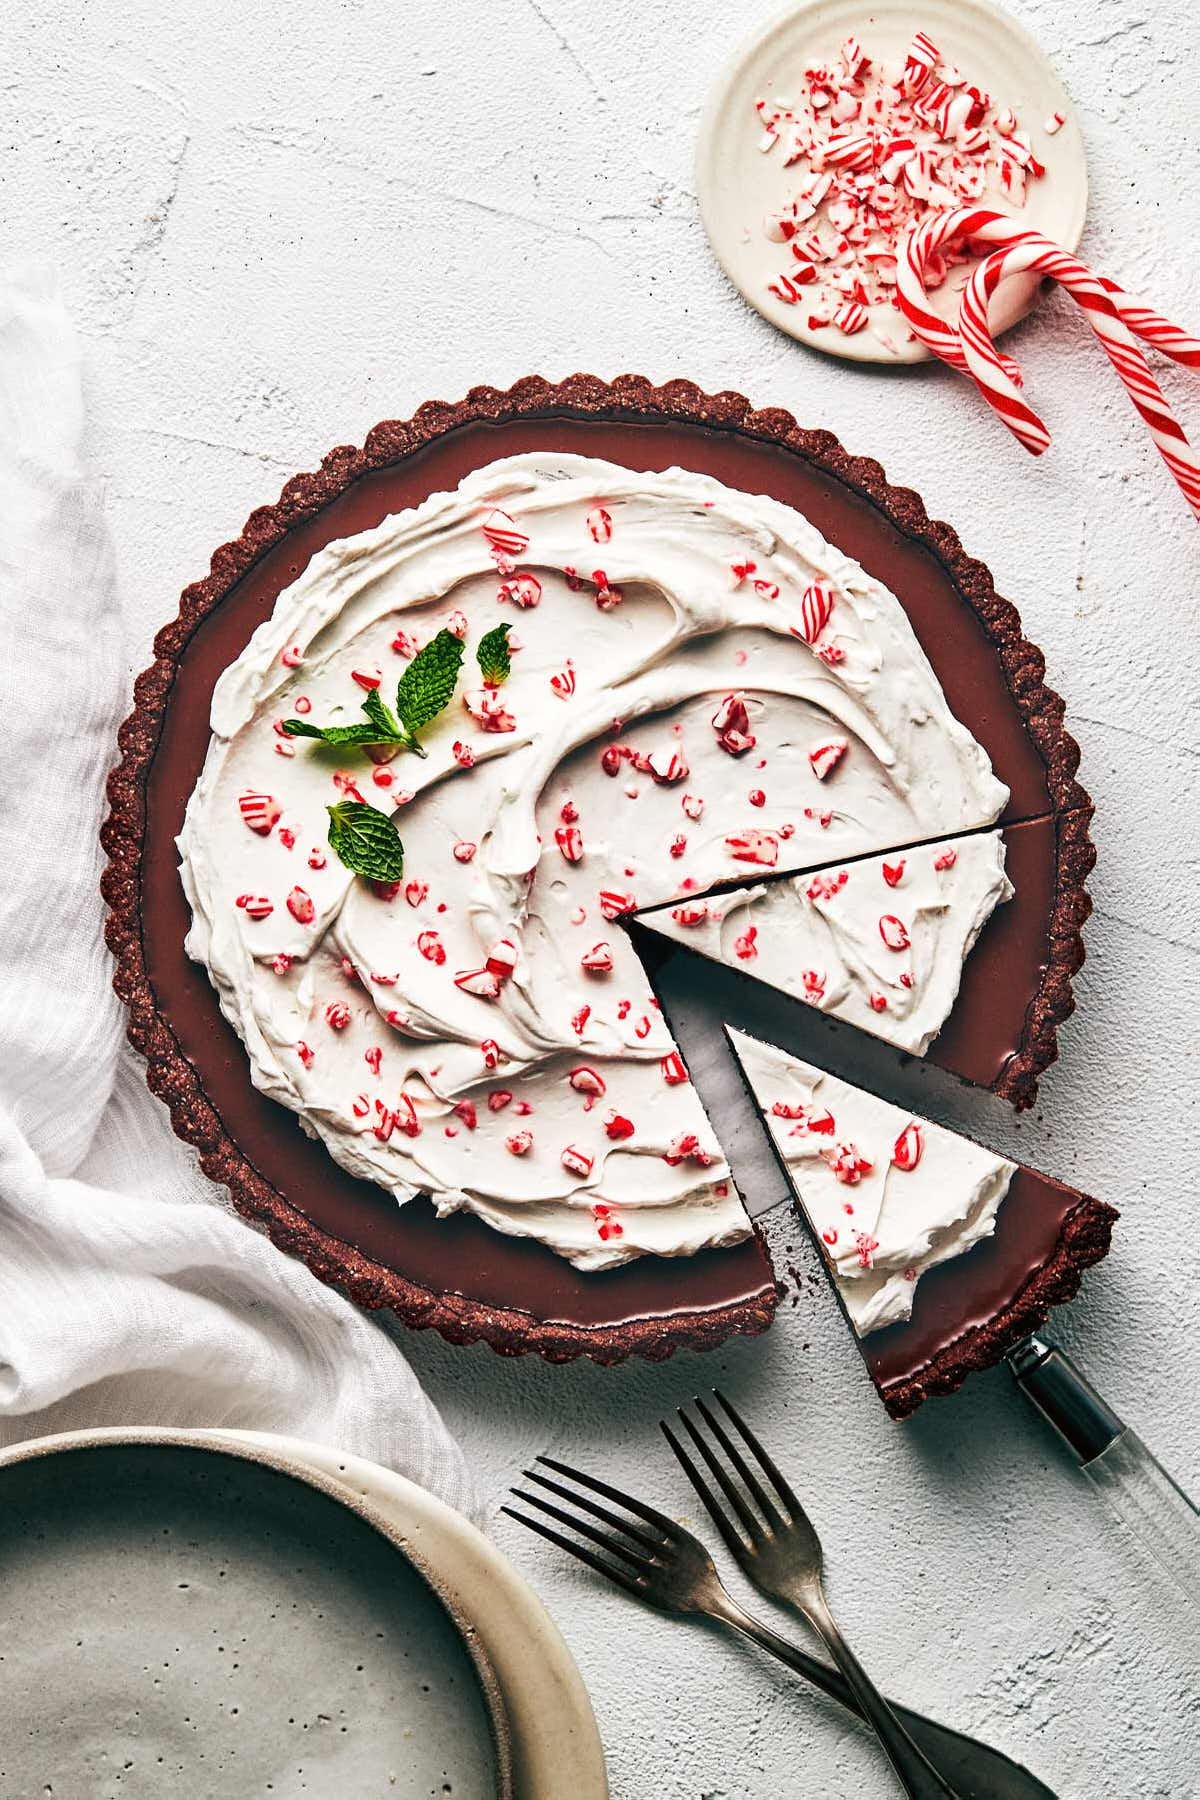 Chocolate peppermint tart topped with candy cake and sliced